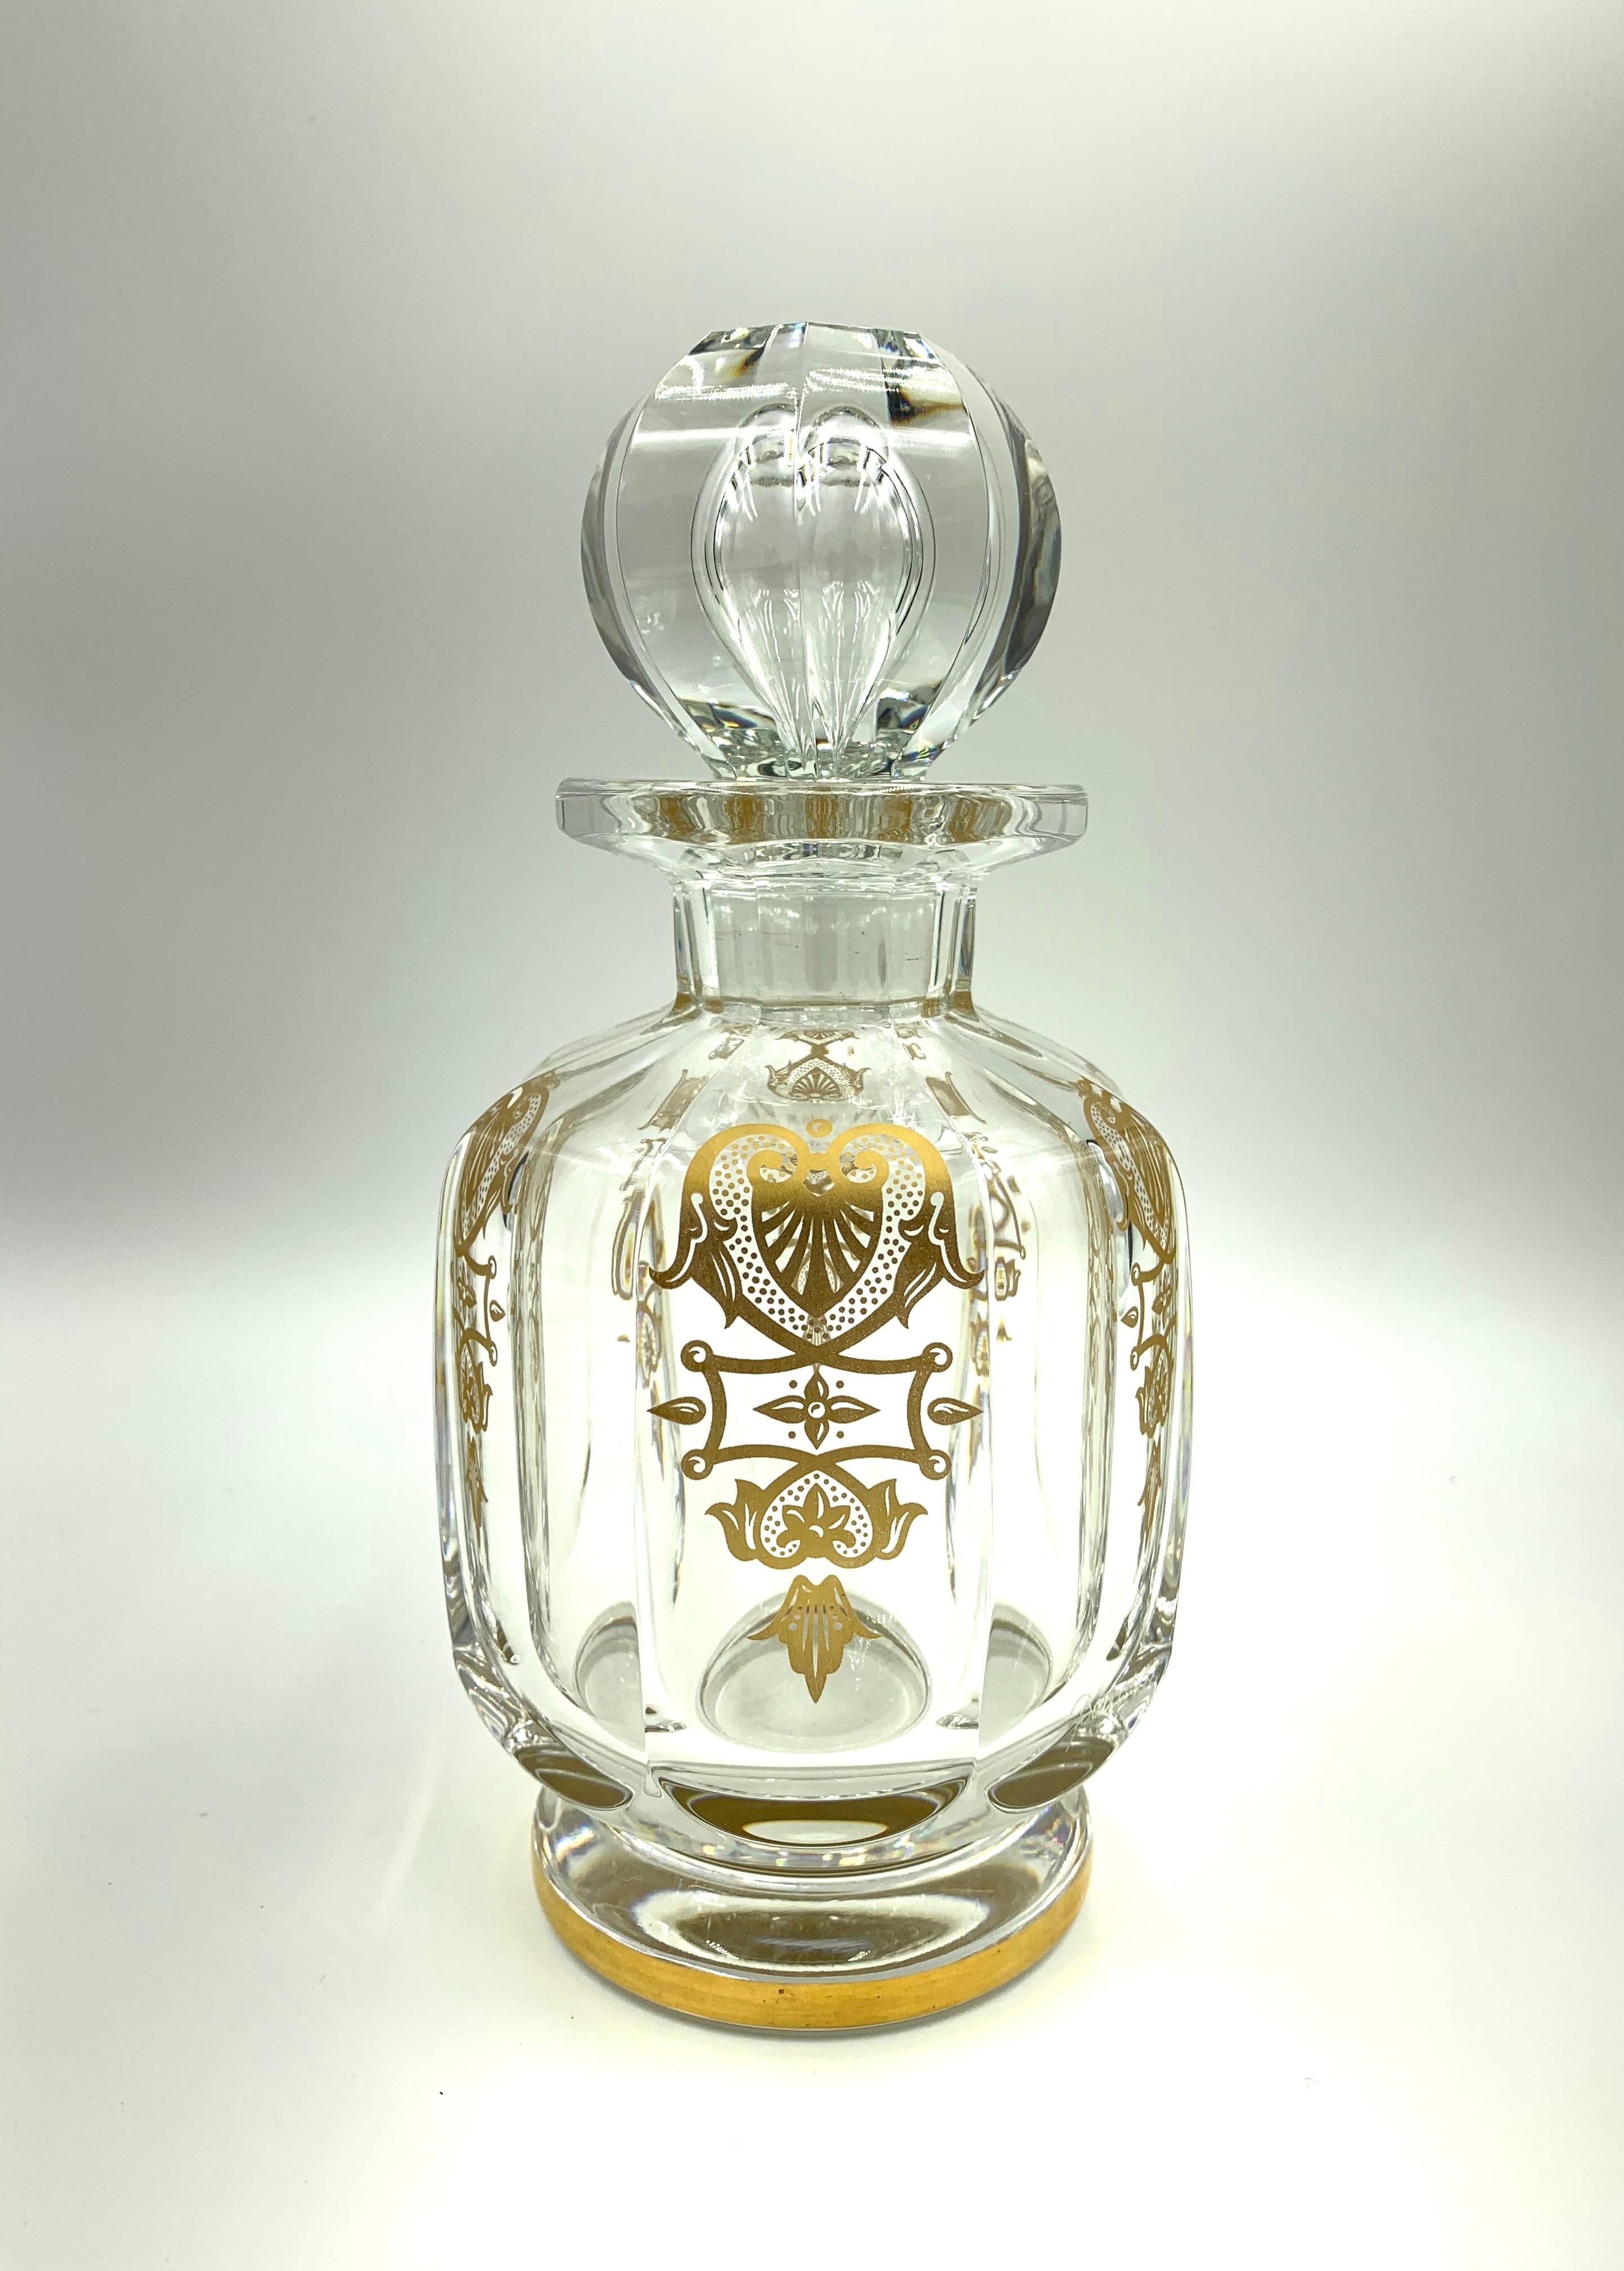 Rare three piece Baccarat crystal Empire vanity set composed of a large scent bottle with stopper, a perfume automizer and a covered jar. Out of production for many years and the epitome of luxury for a dressing room. This set is in very good